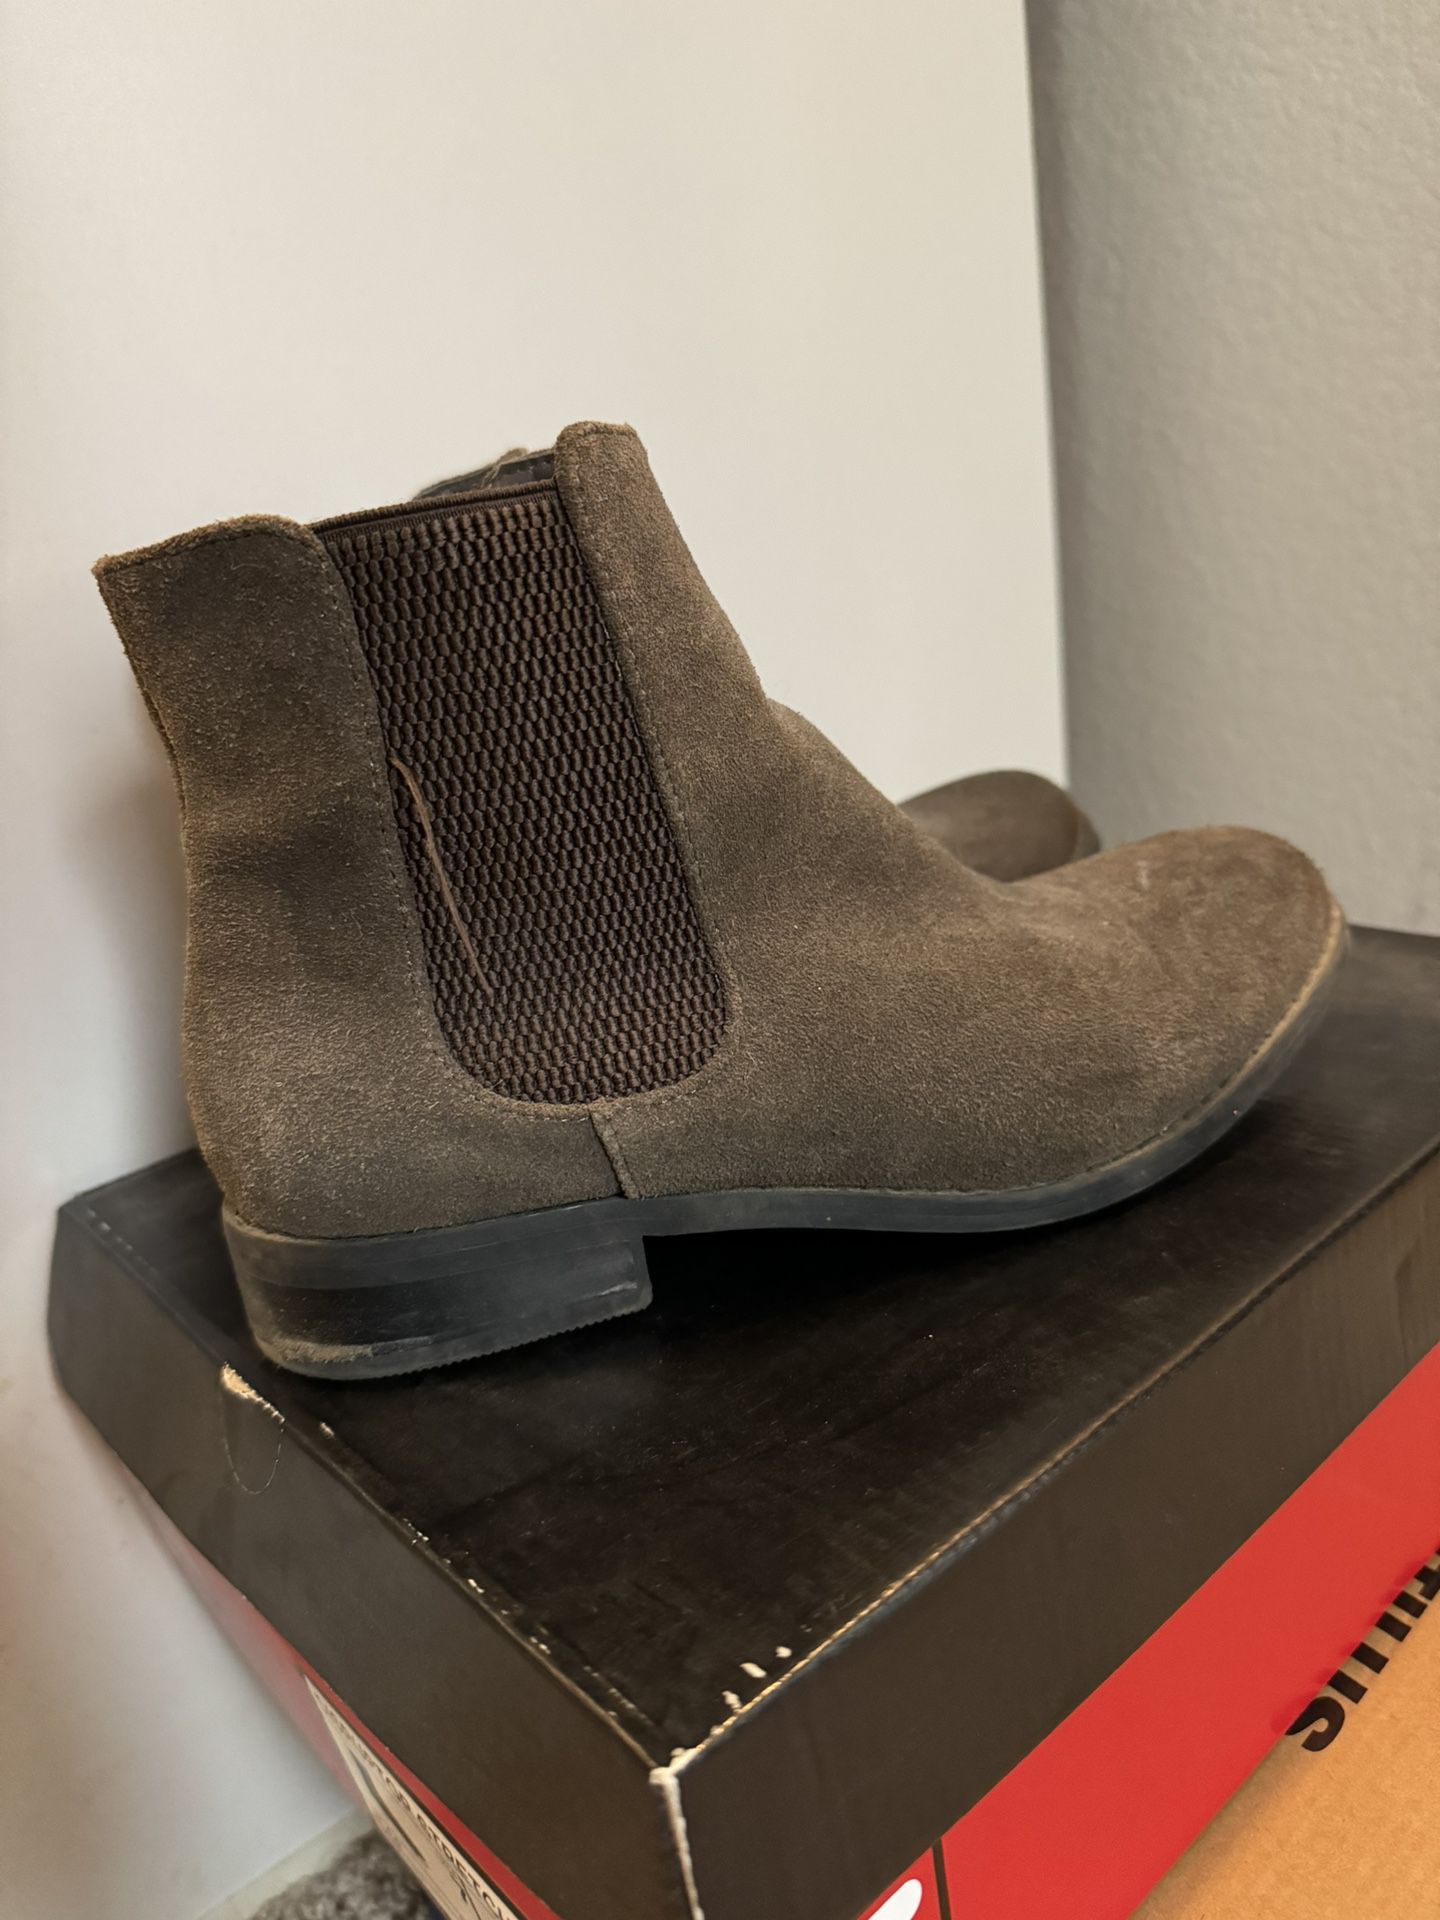 Chelsea Boots 